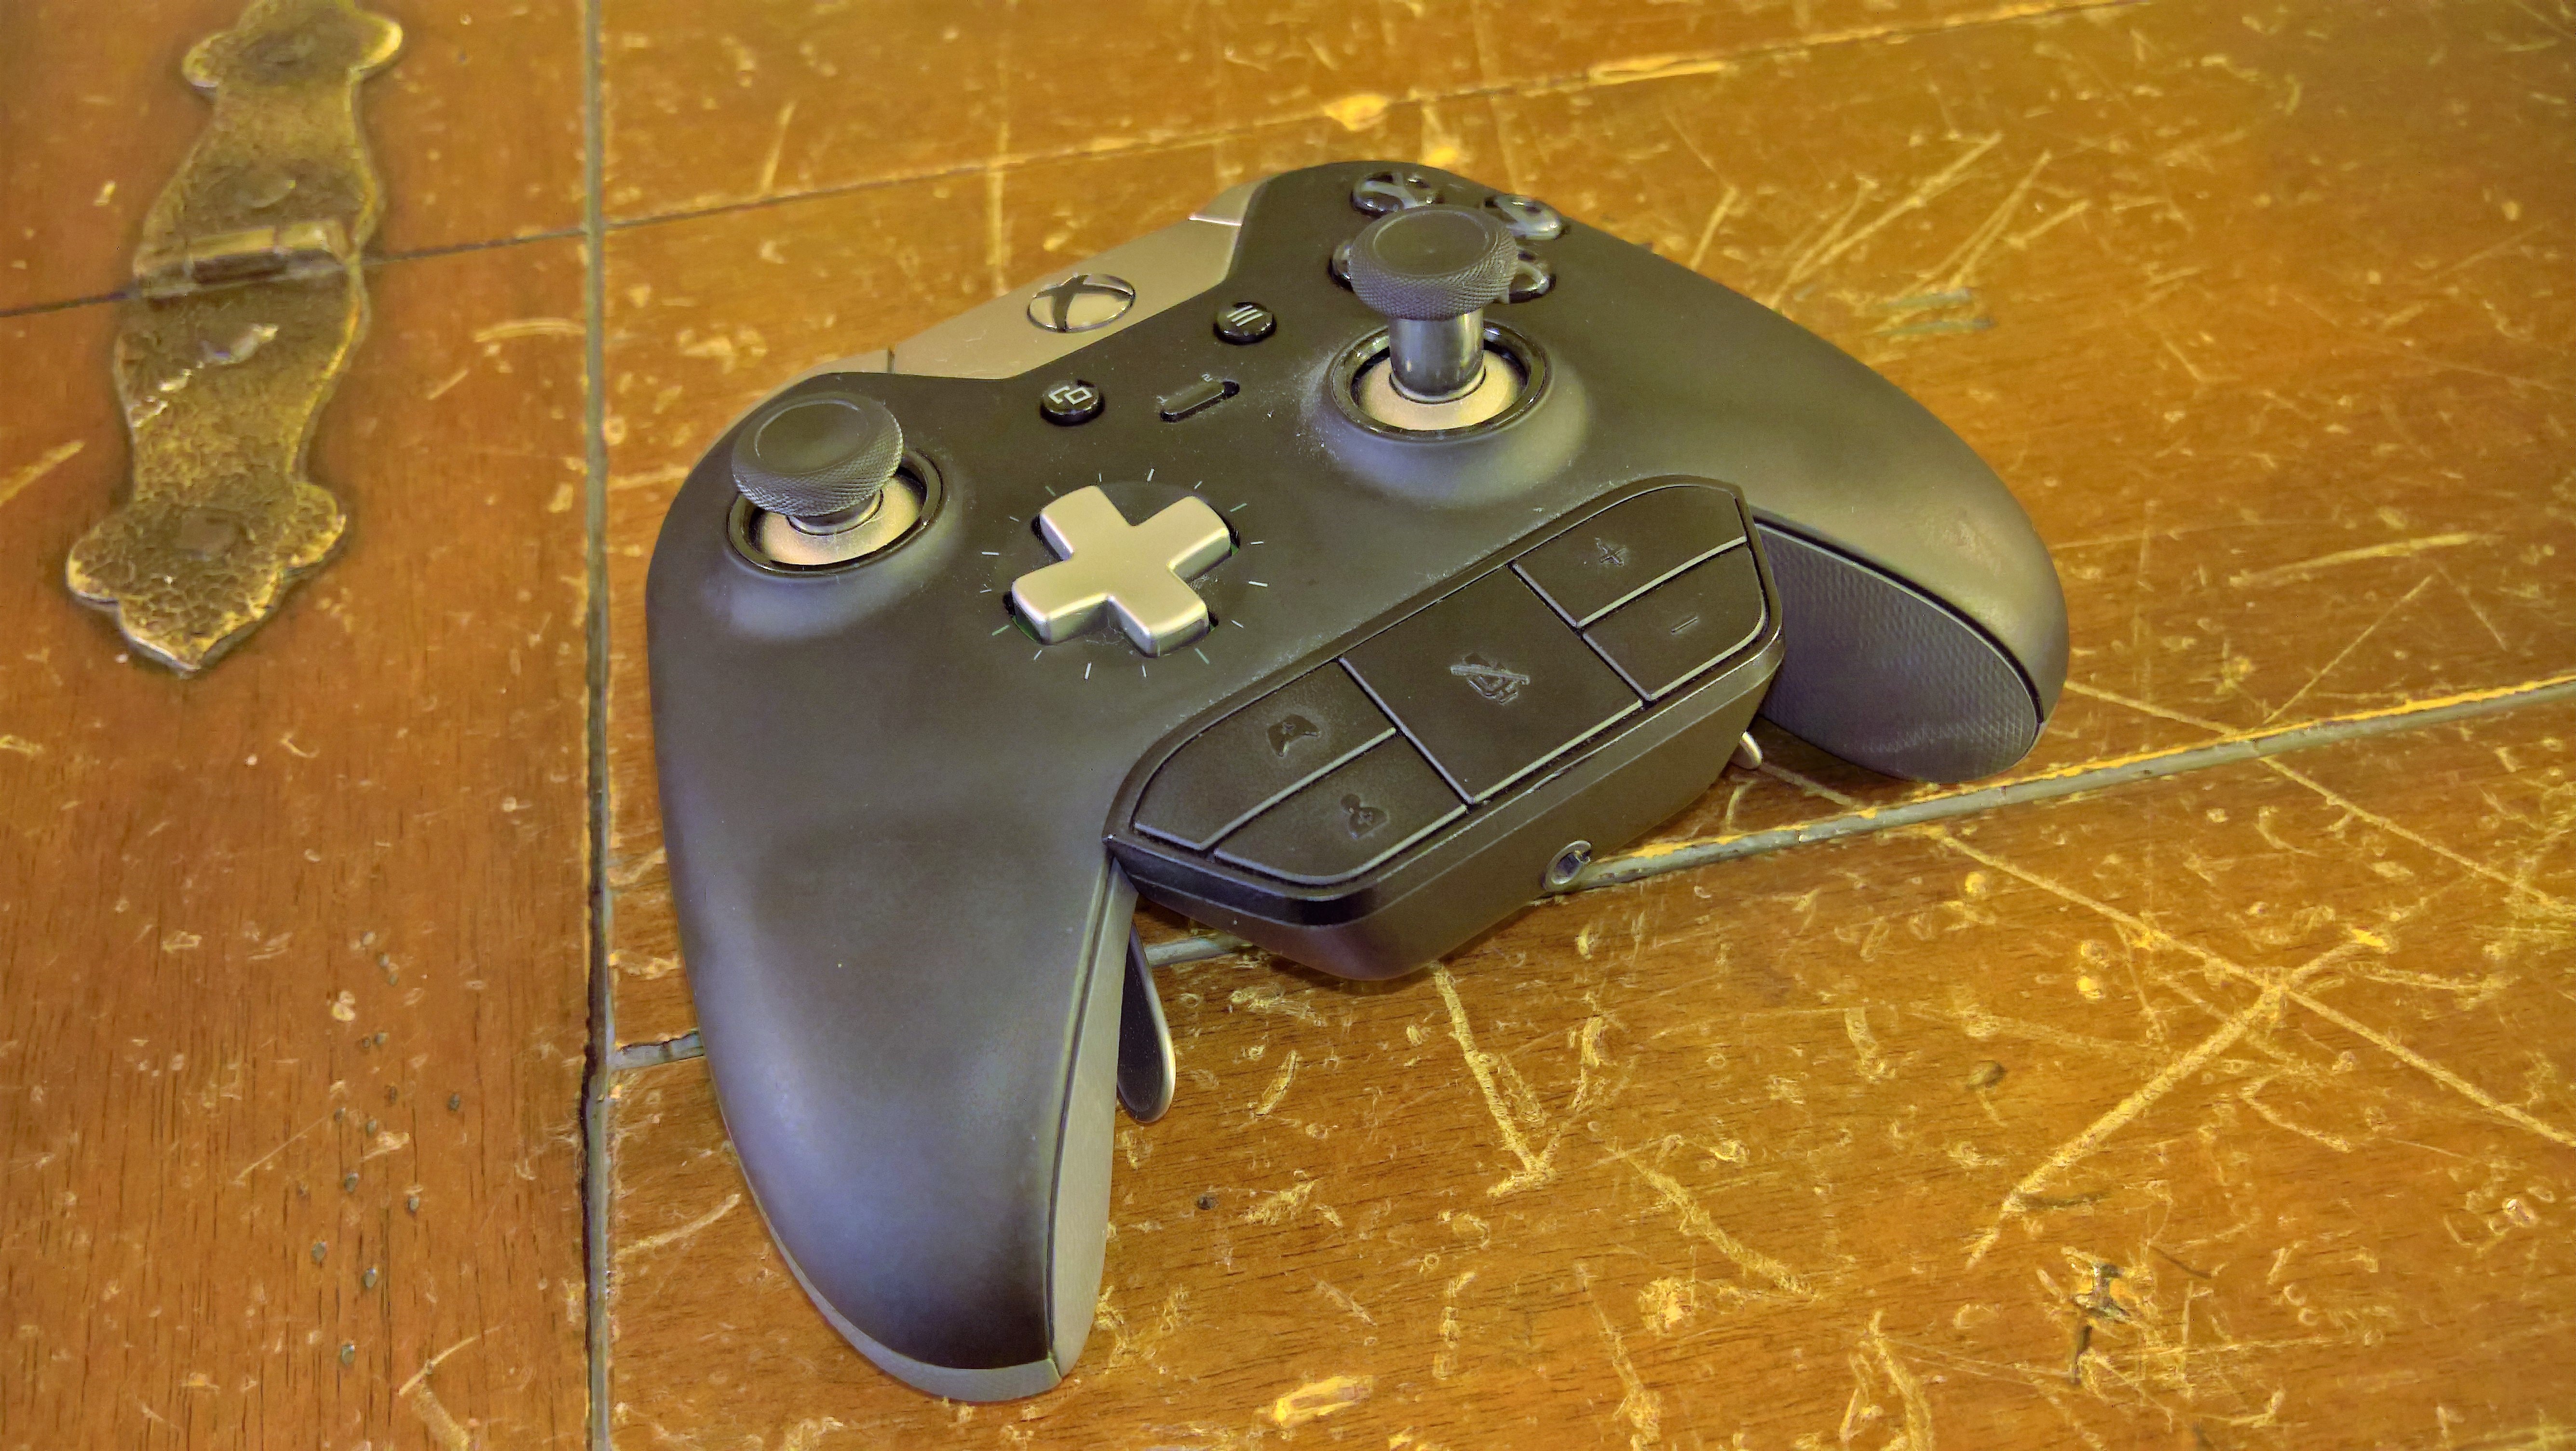 pickpocket runescape xbox one controller